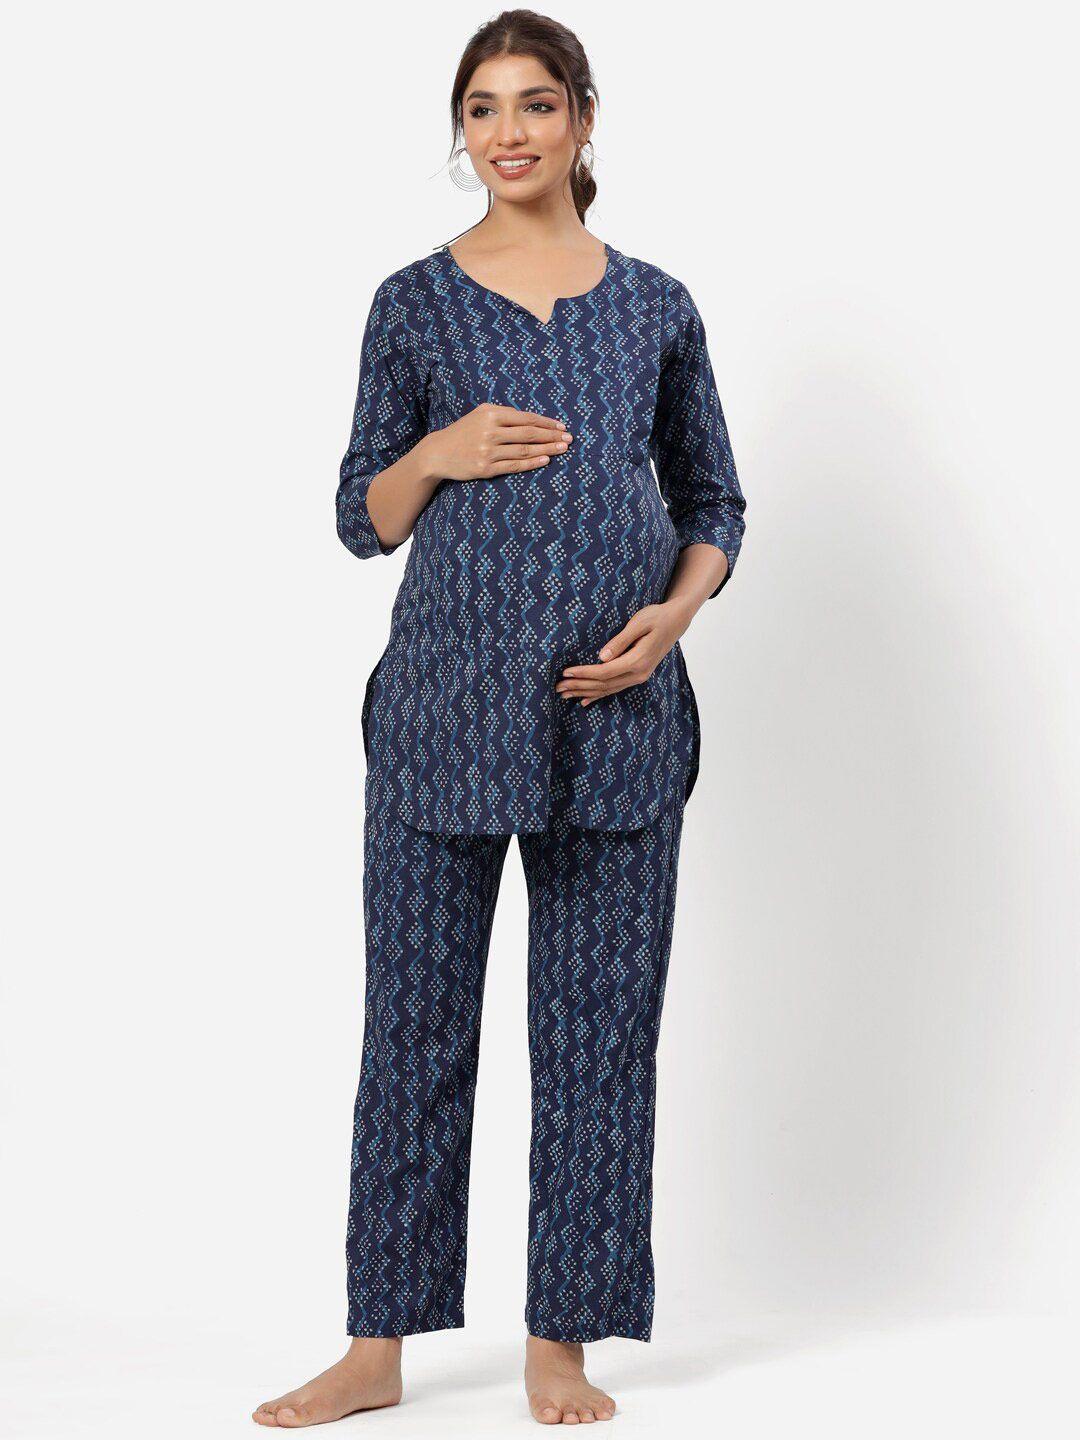 crafiqa-floral-printed-pure-cotton-maternity-nightdress